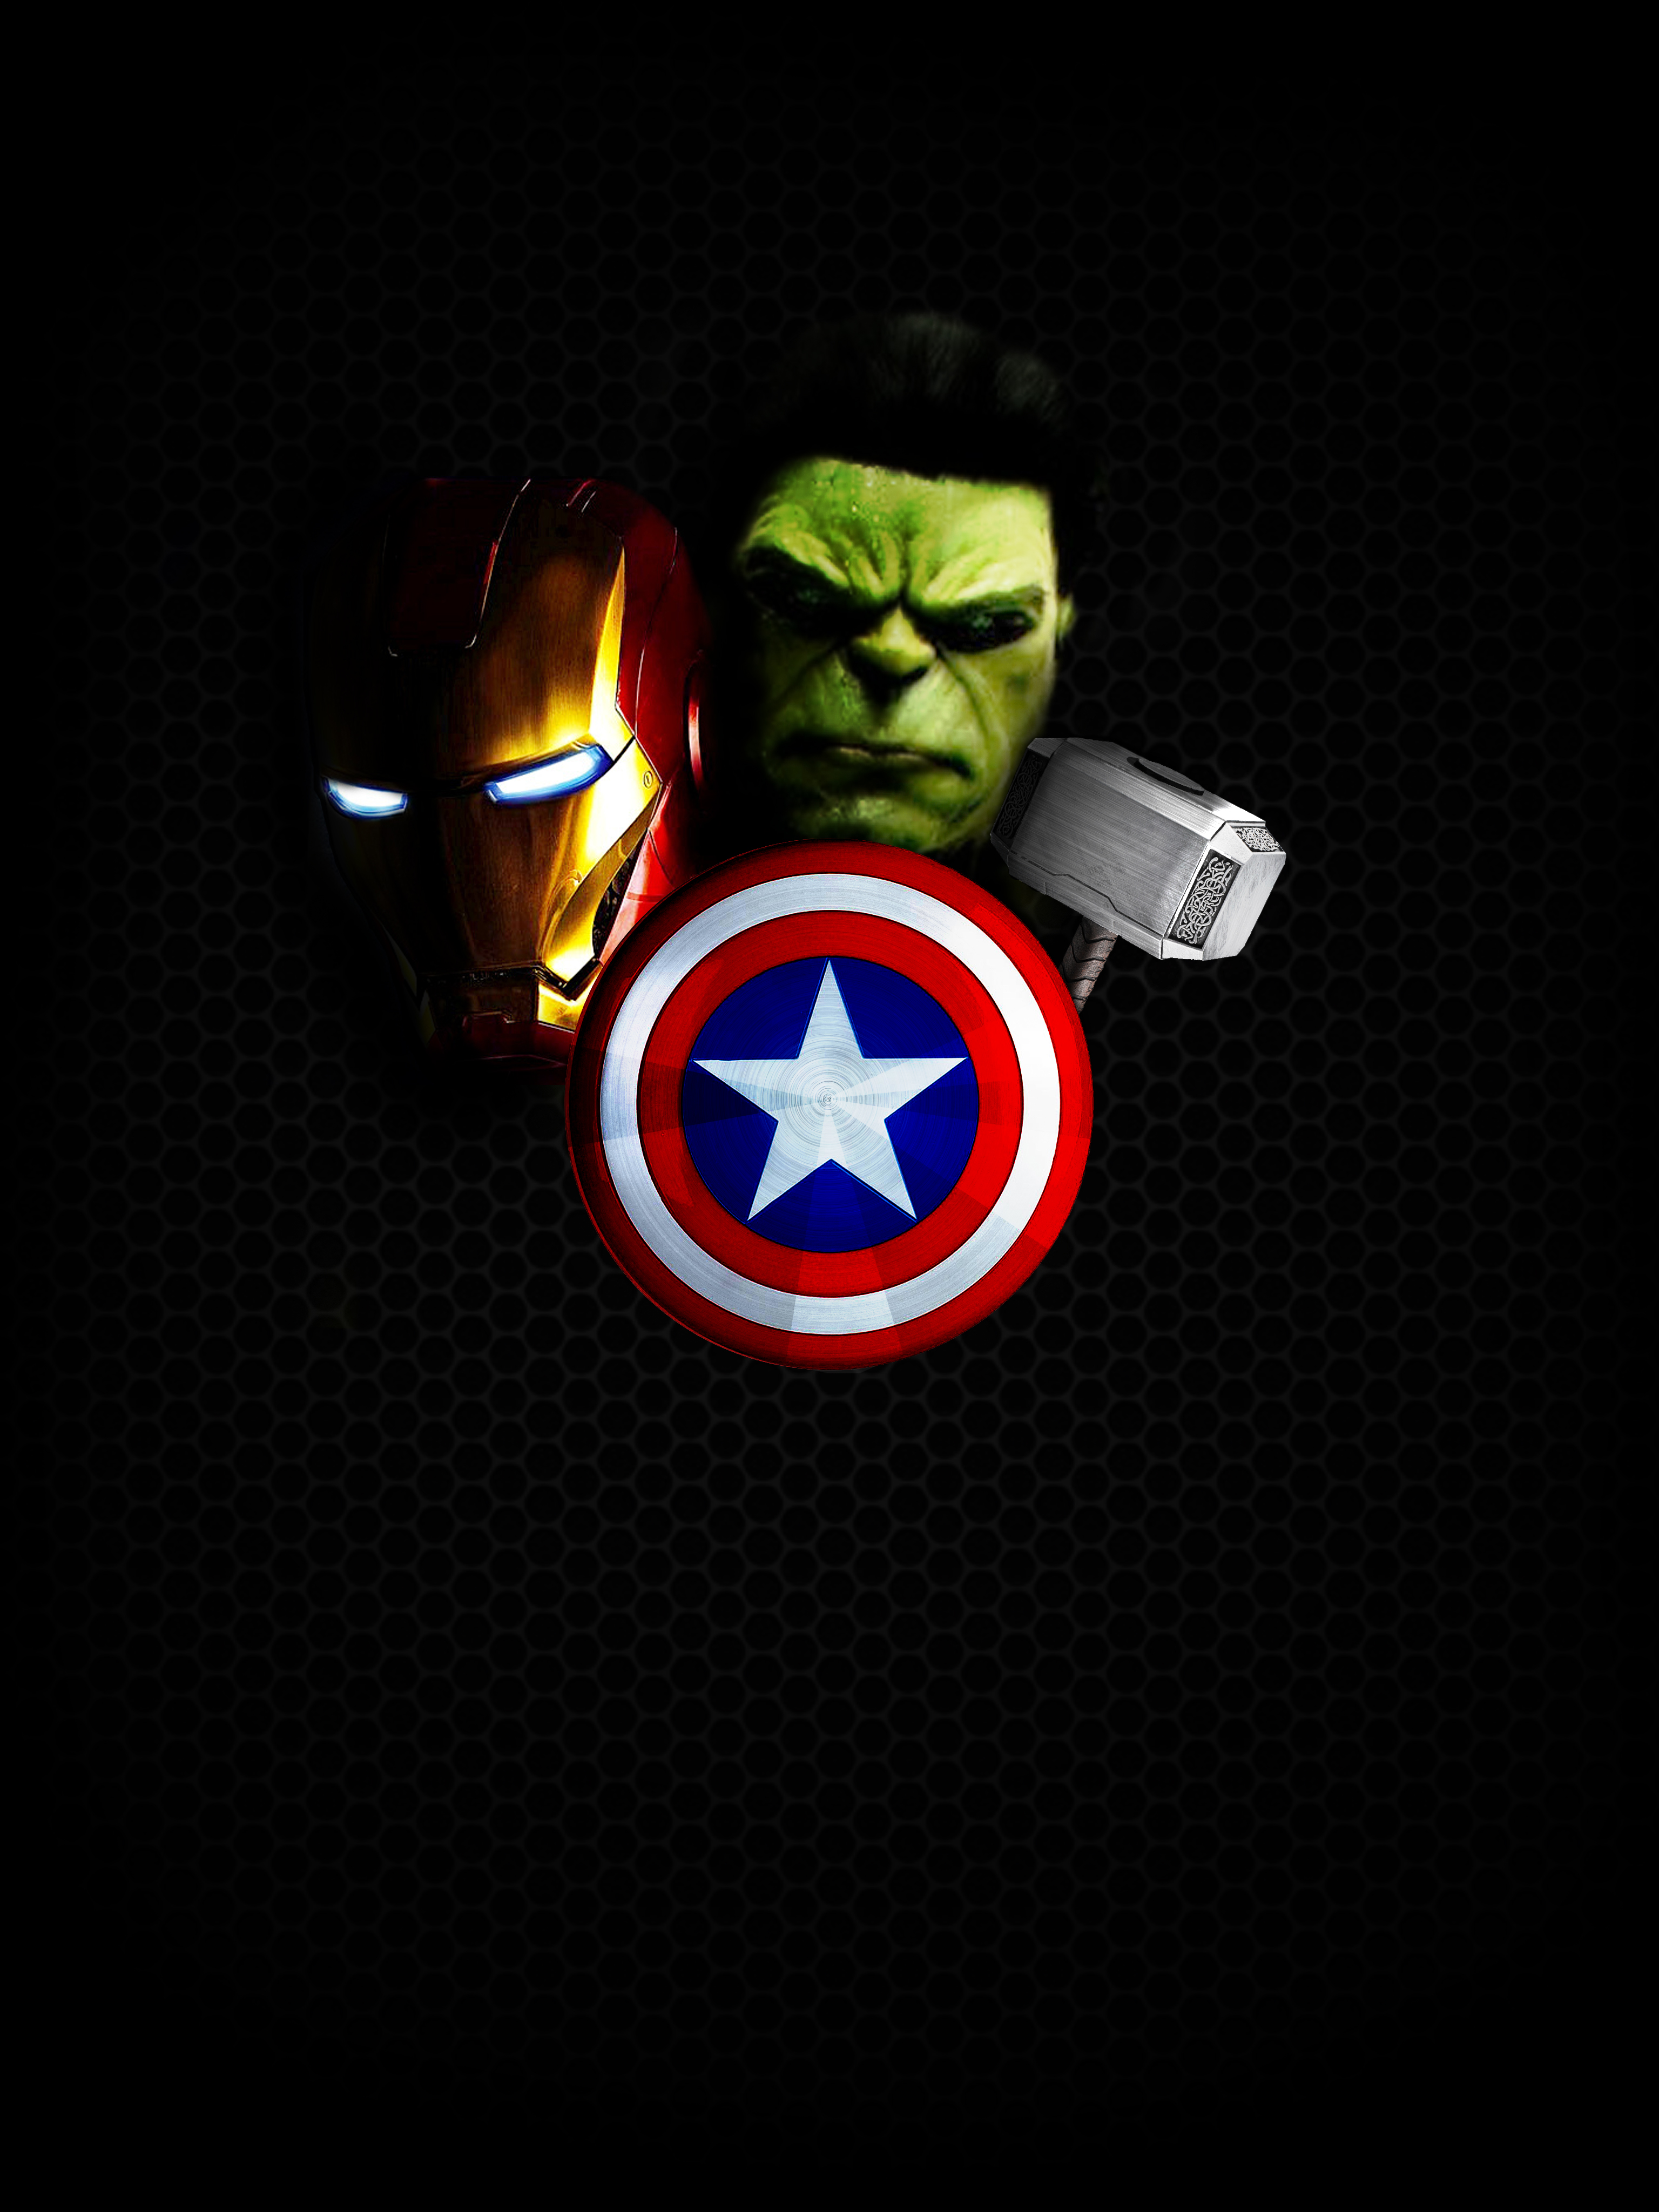 Avengers Wallpapers HD | Avengers wallpaper, Avengers pictures, Avengers  movie posters